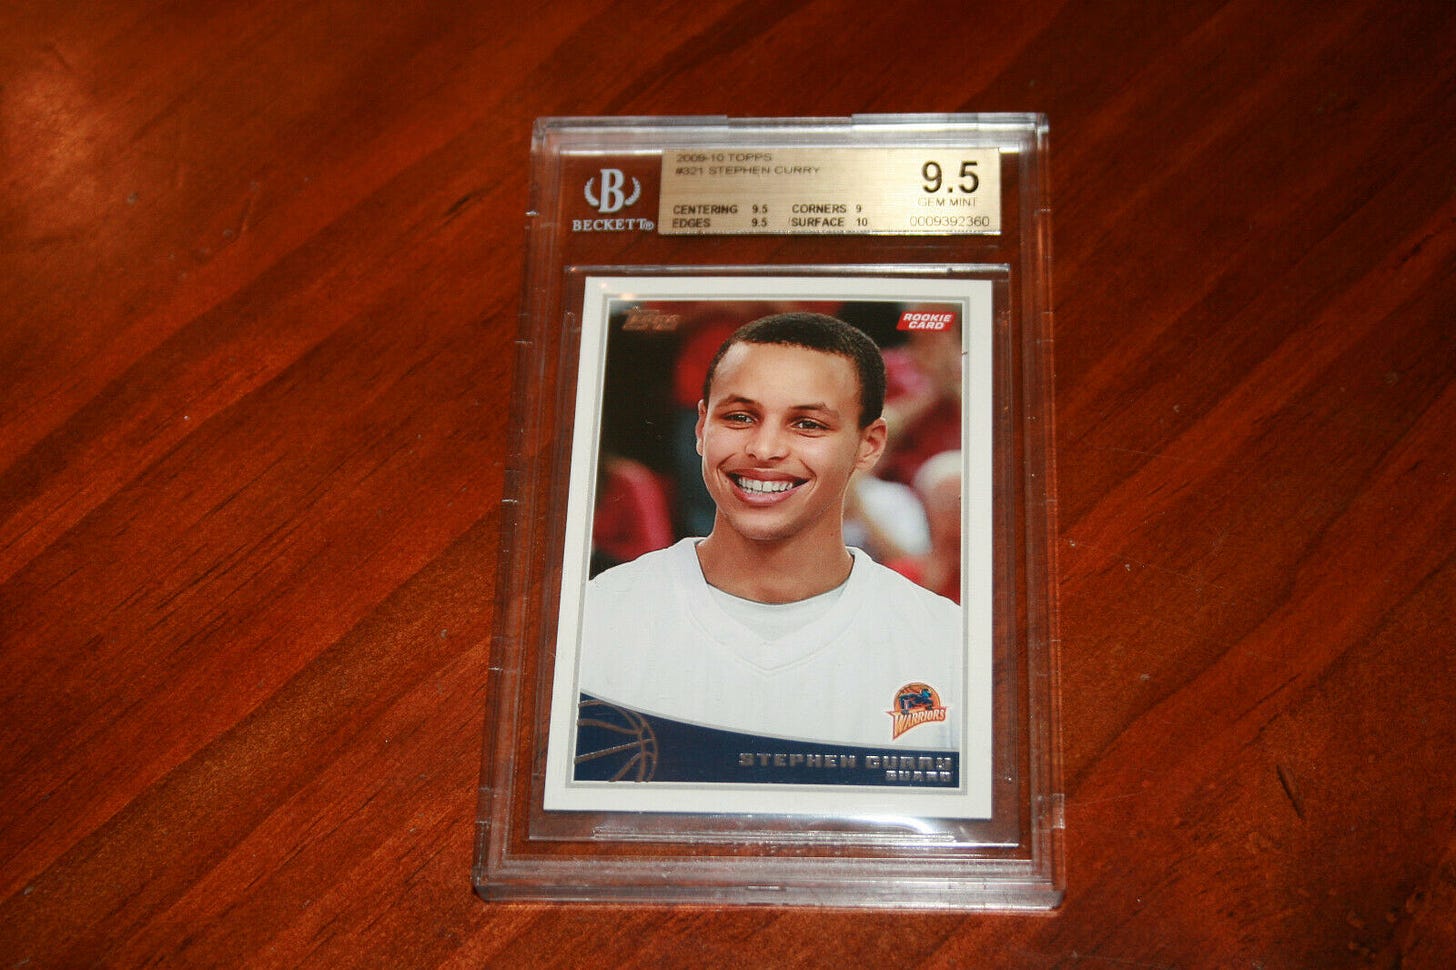 Image 1 - STEPHEN CURRY 2009 TOPPS ROOKIE CARD #321 BGS 9.5 GEM MINT (SURFACE 10)